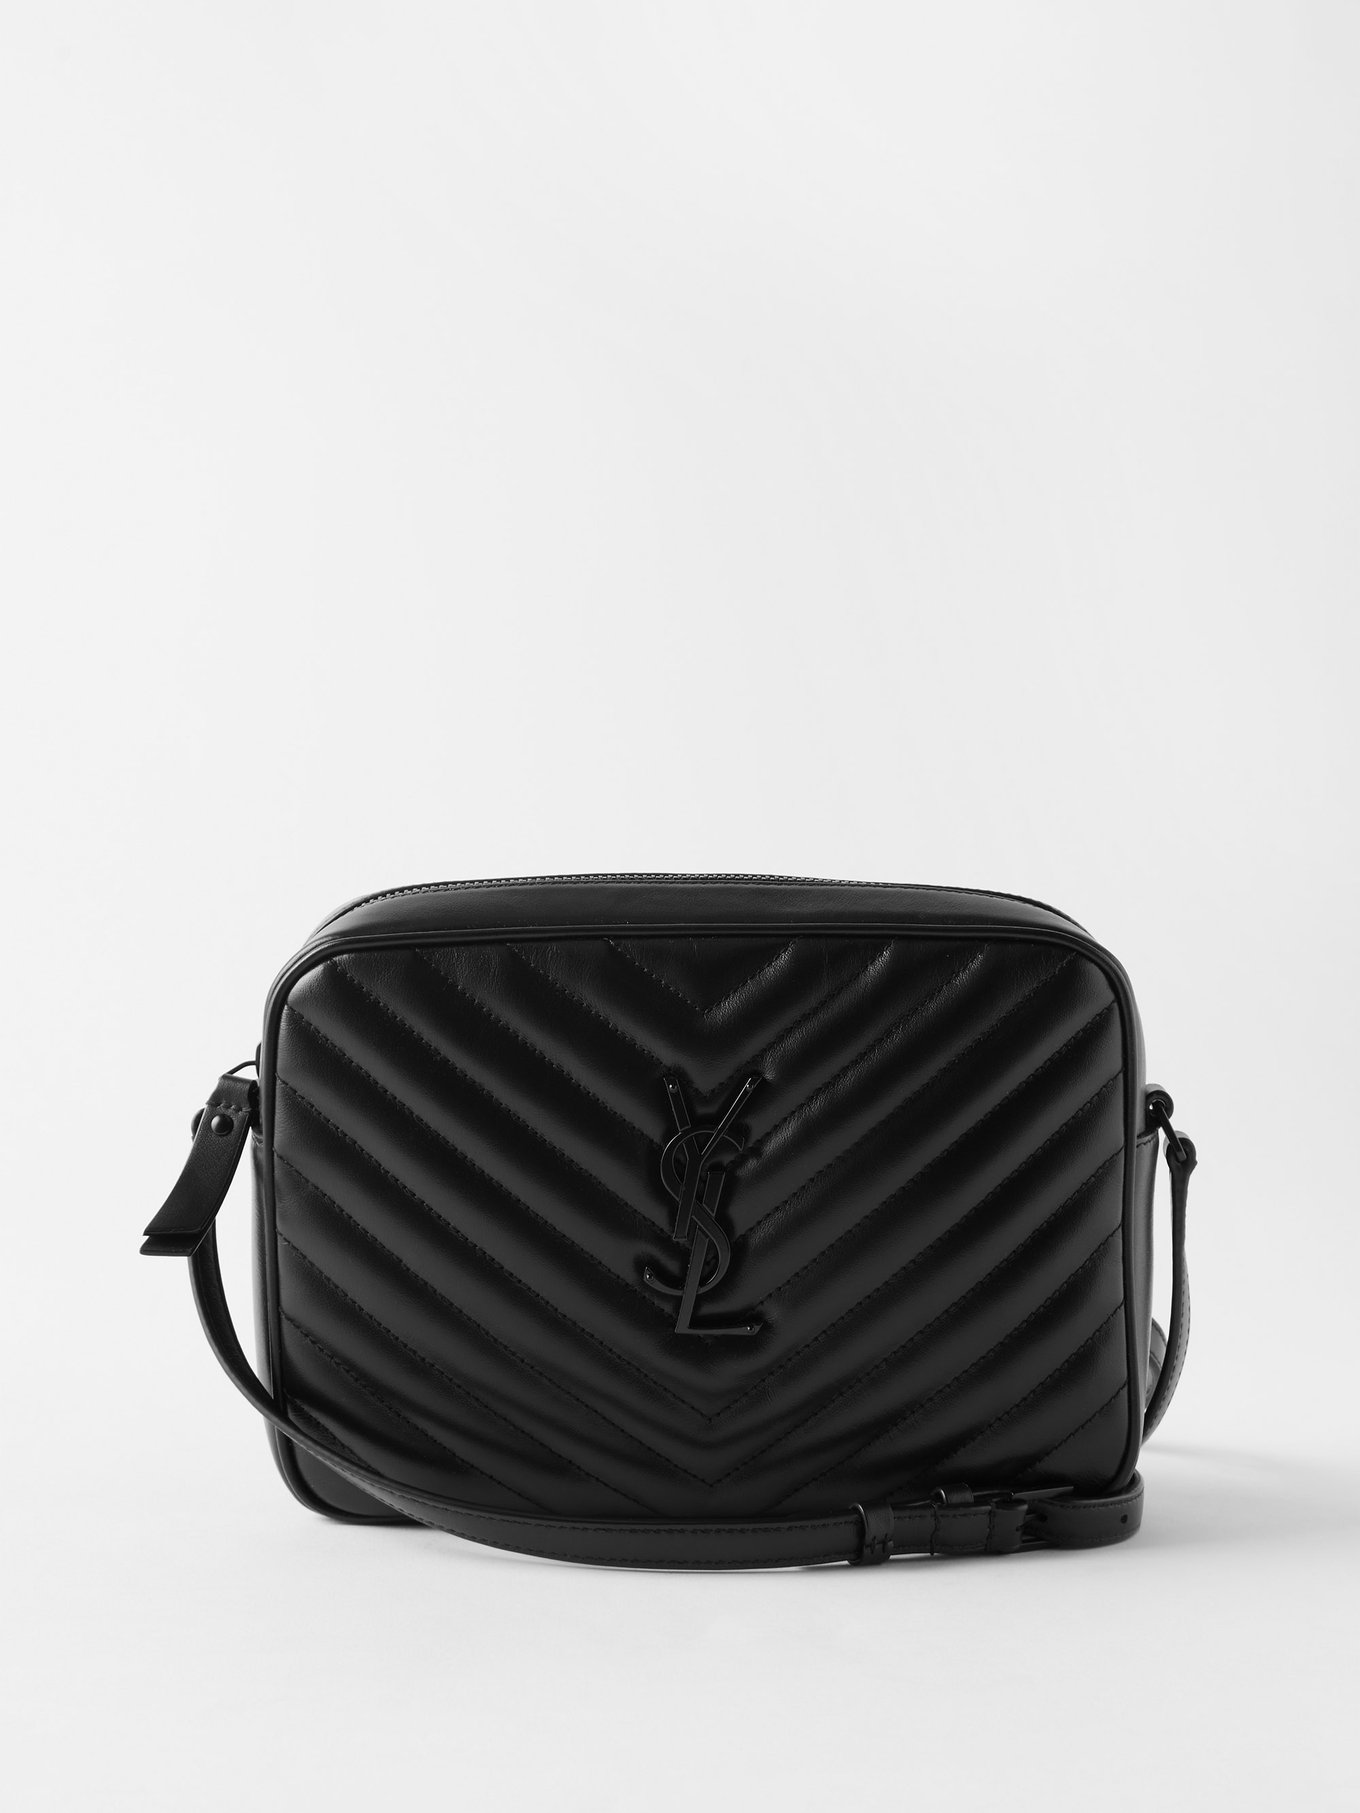 Saint Laurent Lou Mini Bag in Quilted Shiny Leather - Black - Women